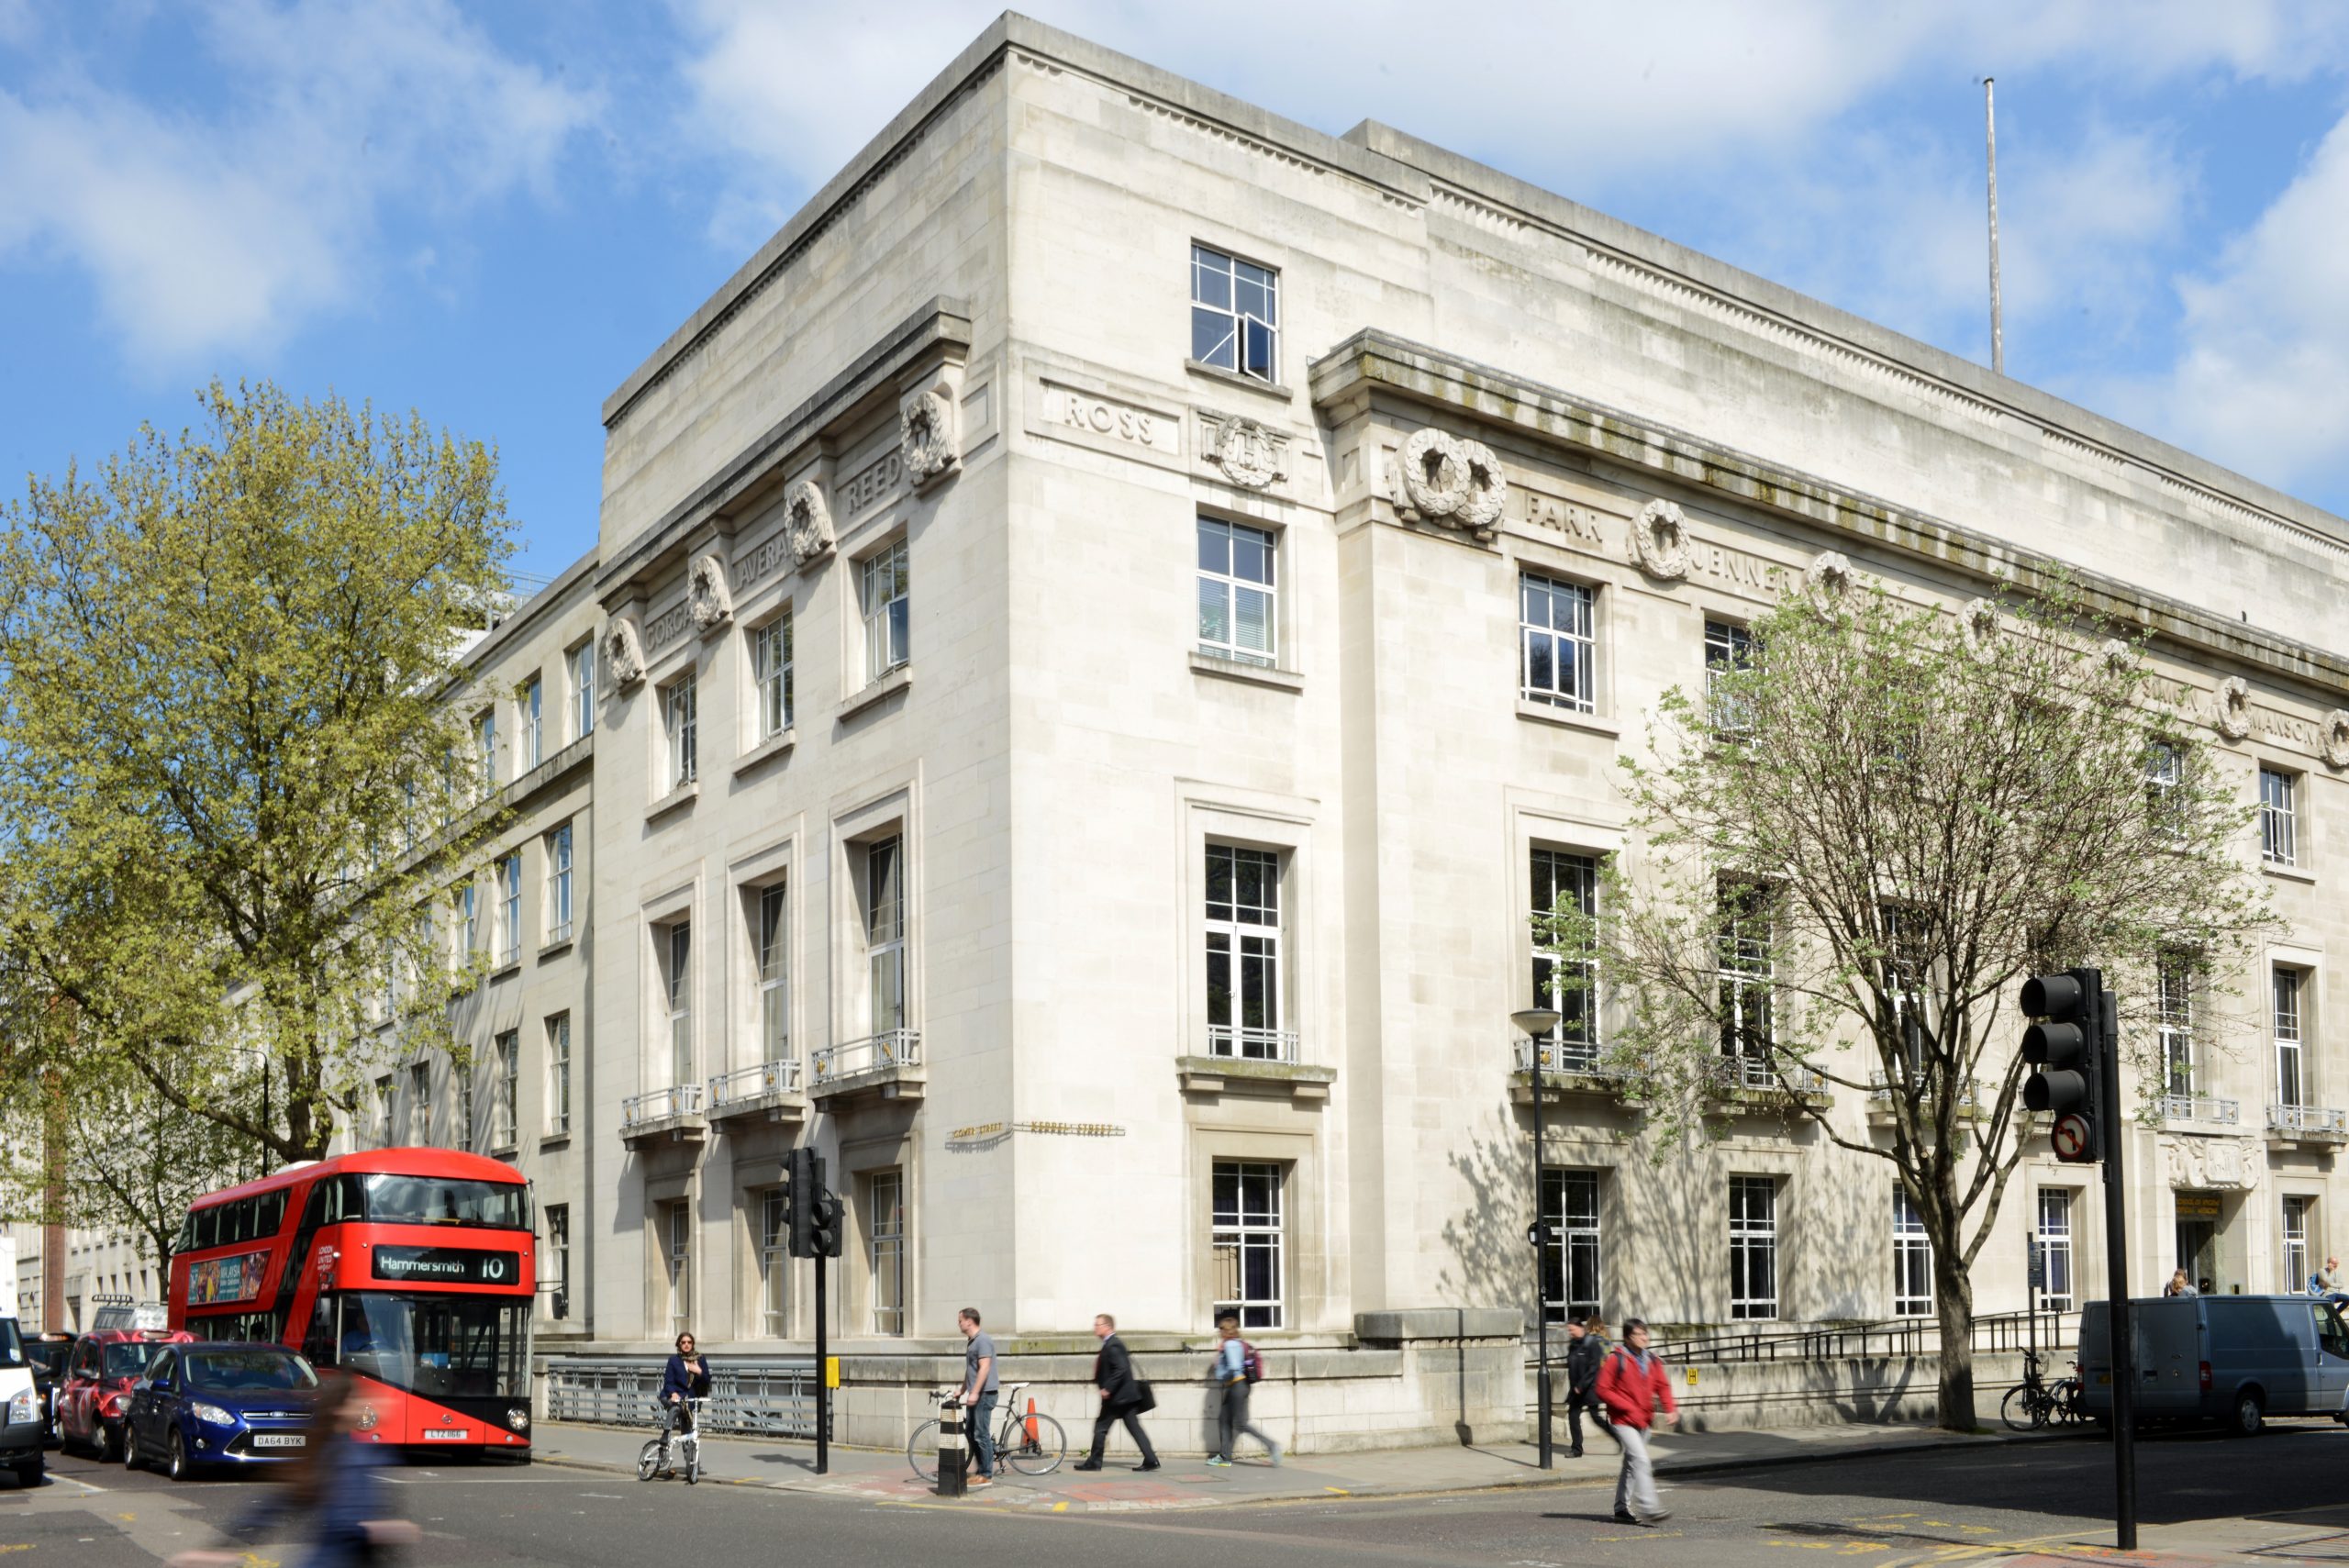 BAKERHICKS APPOINTED TO LSHTM FRAMEWORK TO DELIVER  BEST-IN-CLASS STRUCTURAL ENGINEERING SERVICES